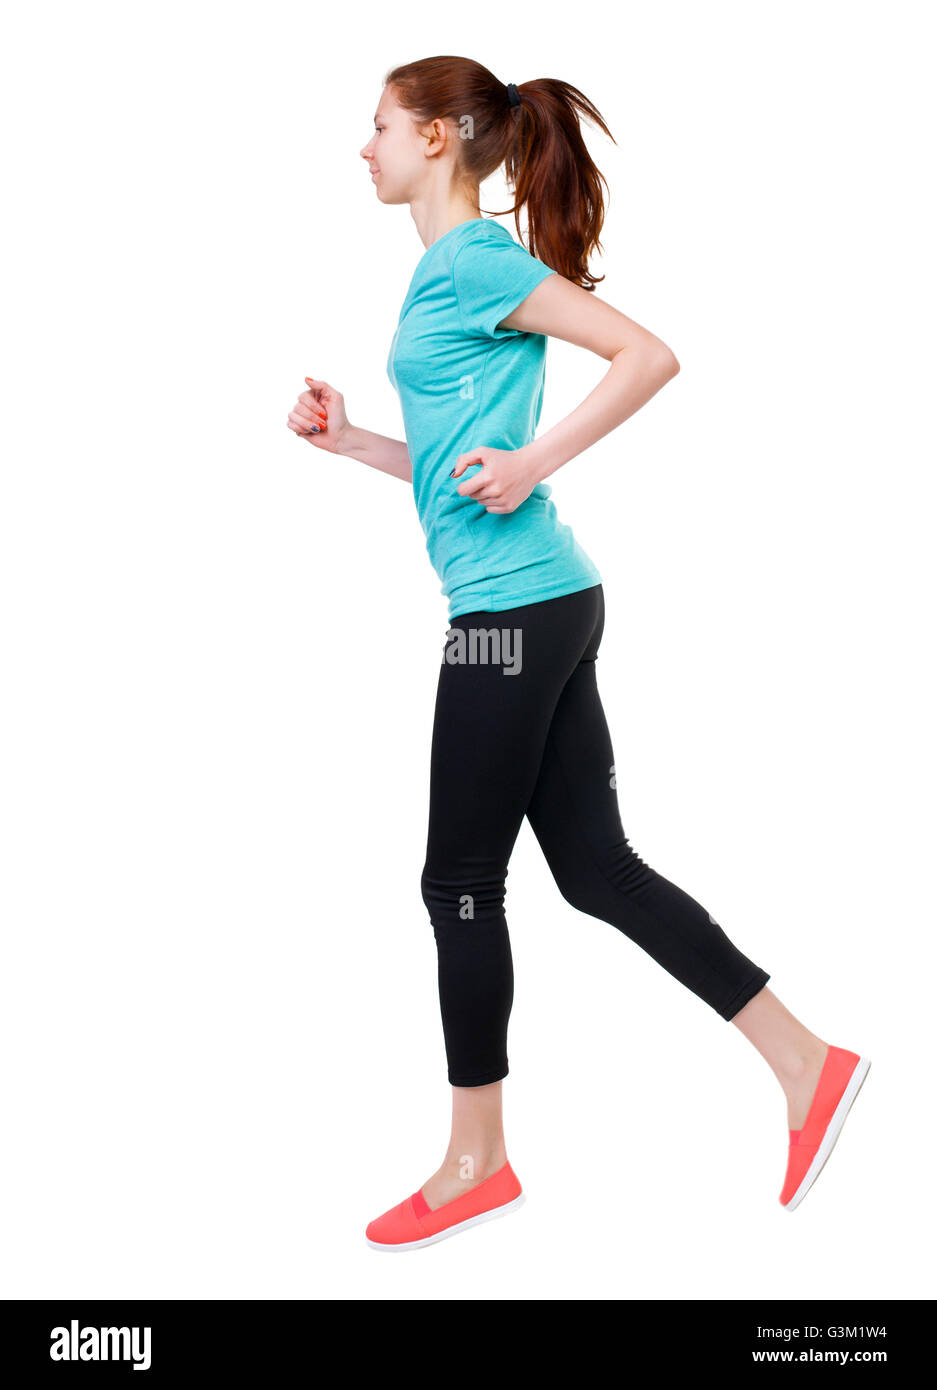 back view of running sport woman. beautiful girl in motion. backside view  of person. Rear view people collection. Isolated over white background.  Sport girl in black tights engaged in running Stock Photo 